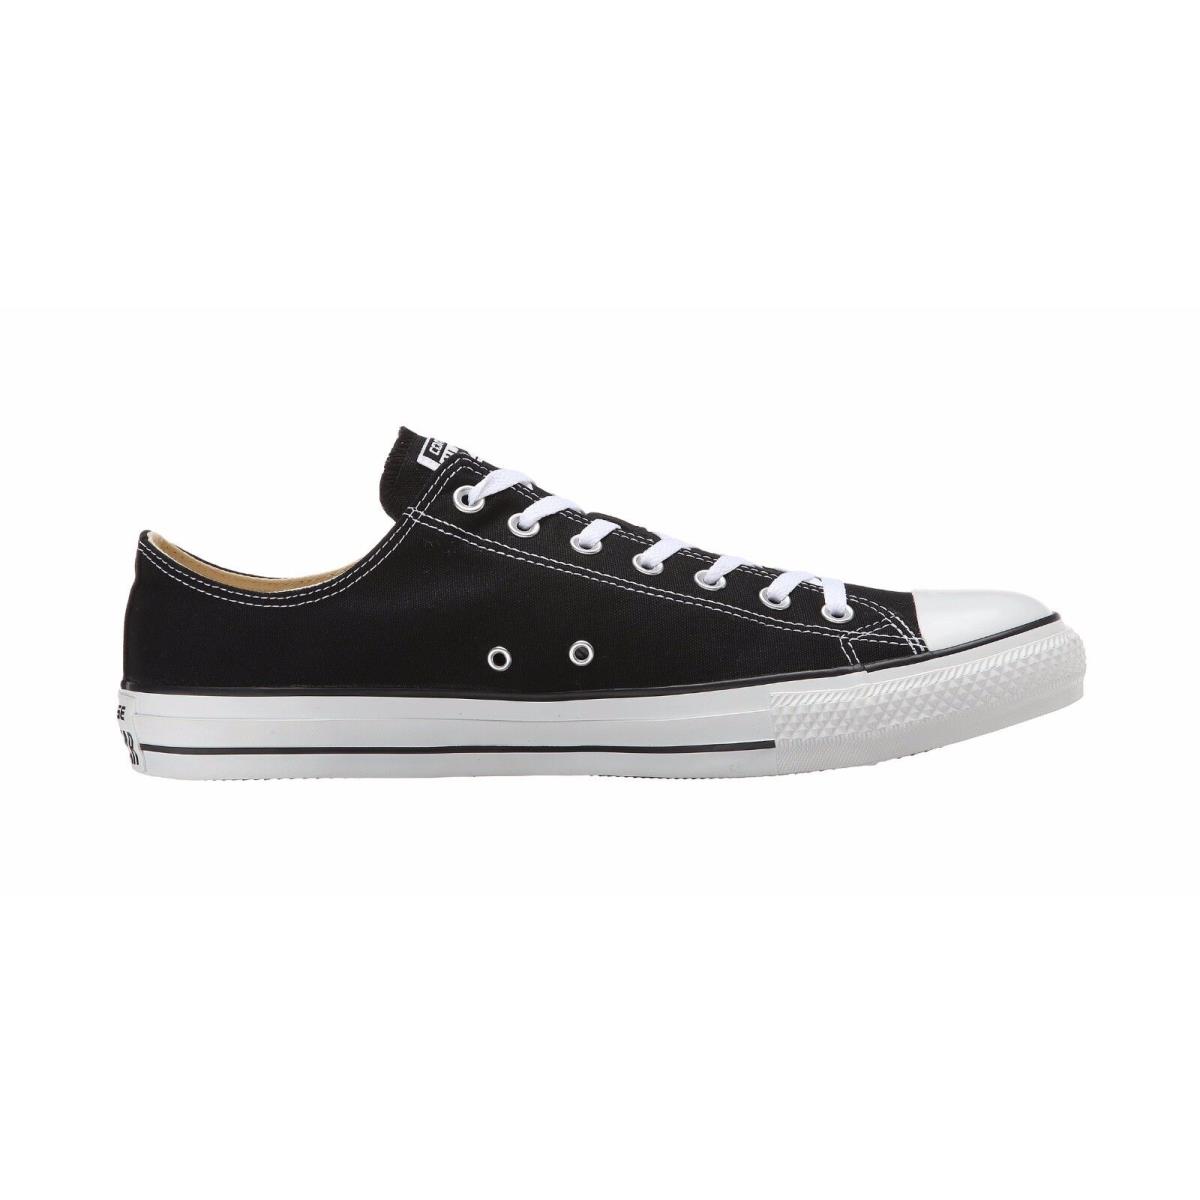 Converse All Star Chuck Taylor Low Top Black White Shoes Men Sneakers M9166 - Black